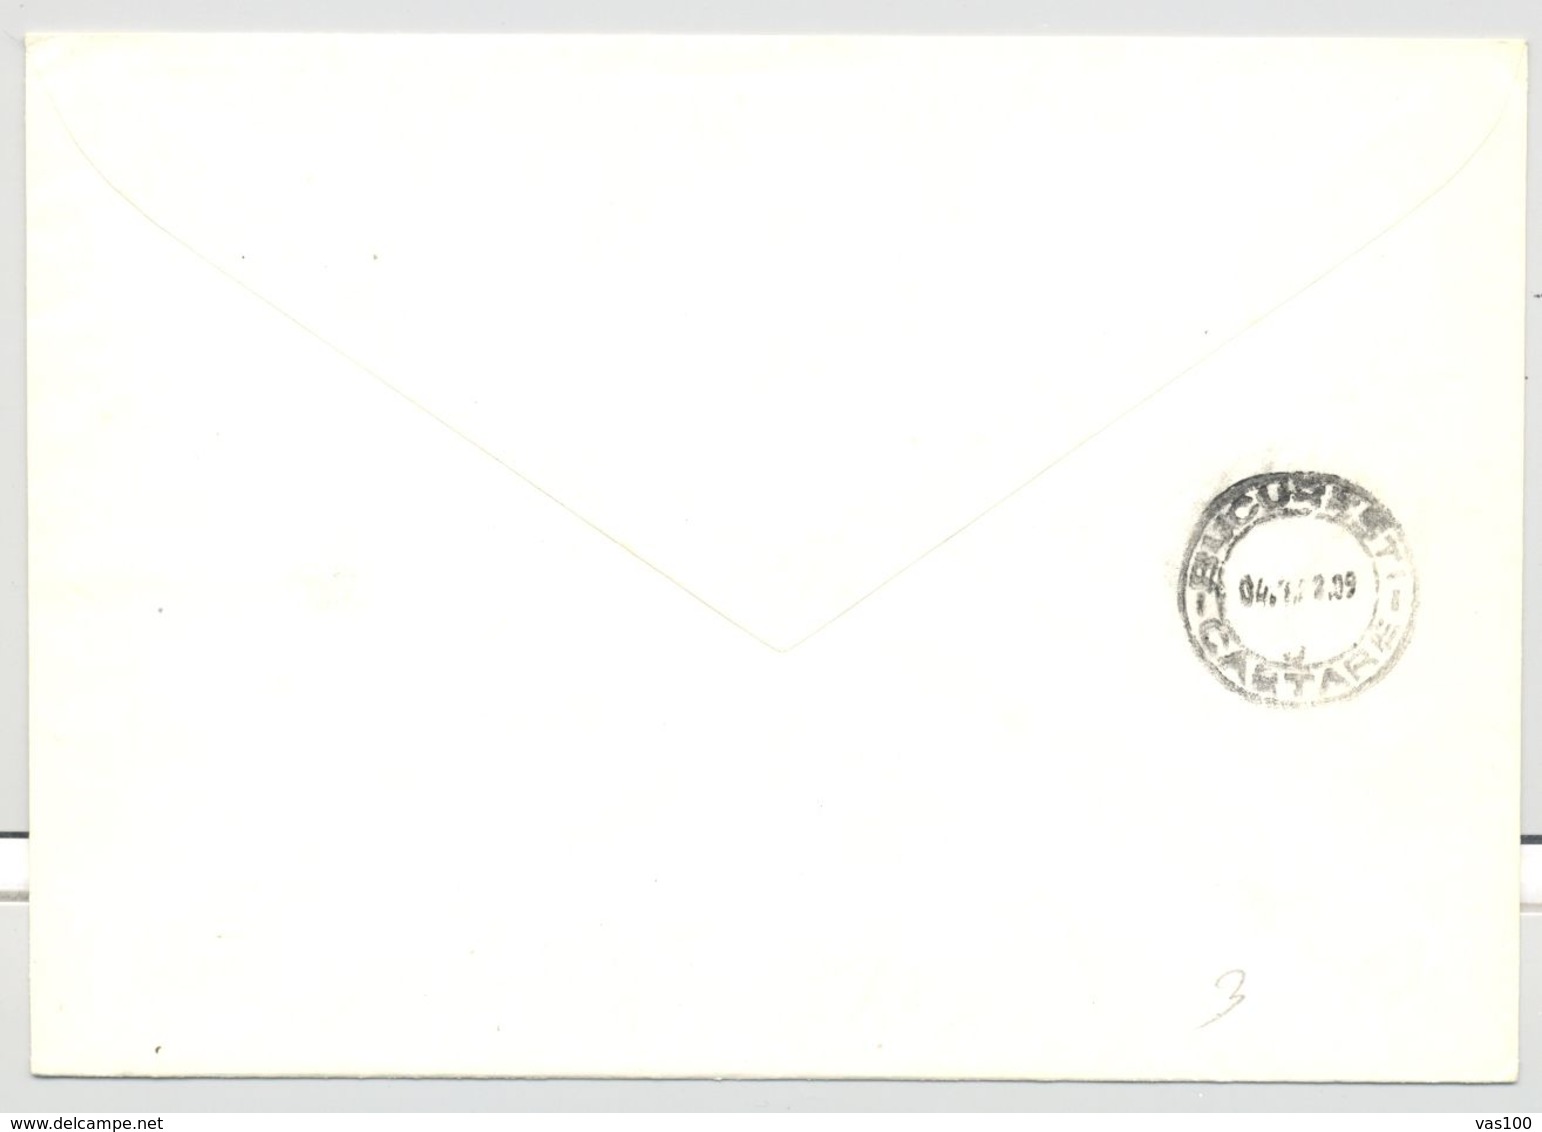 SOCIALIST REPUBLIC NATIONAL DAY, AUGUST 23, SPECIAL POSTMARK AND STAMP ON COVER, 1987, ROMANIA - Covers & Documents